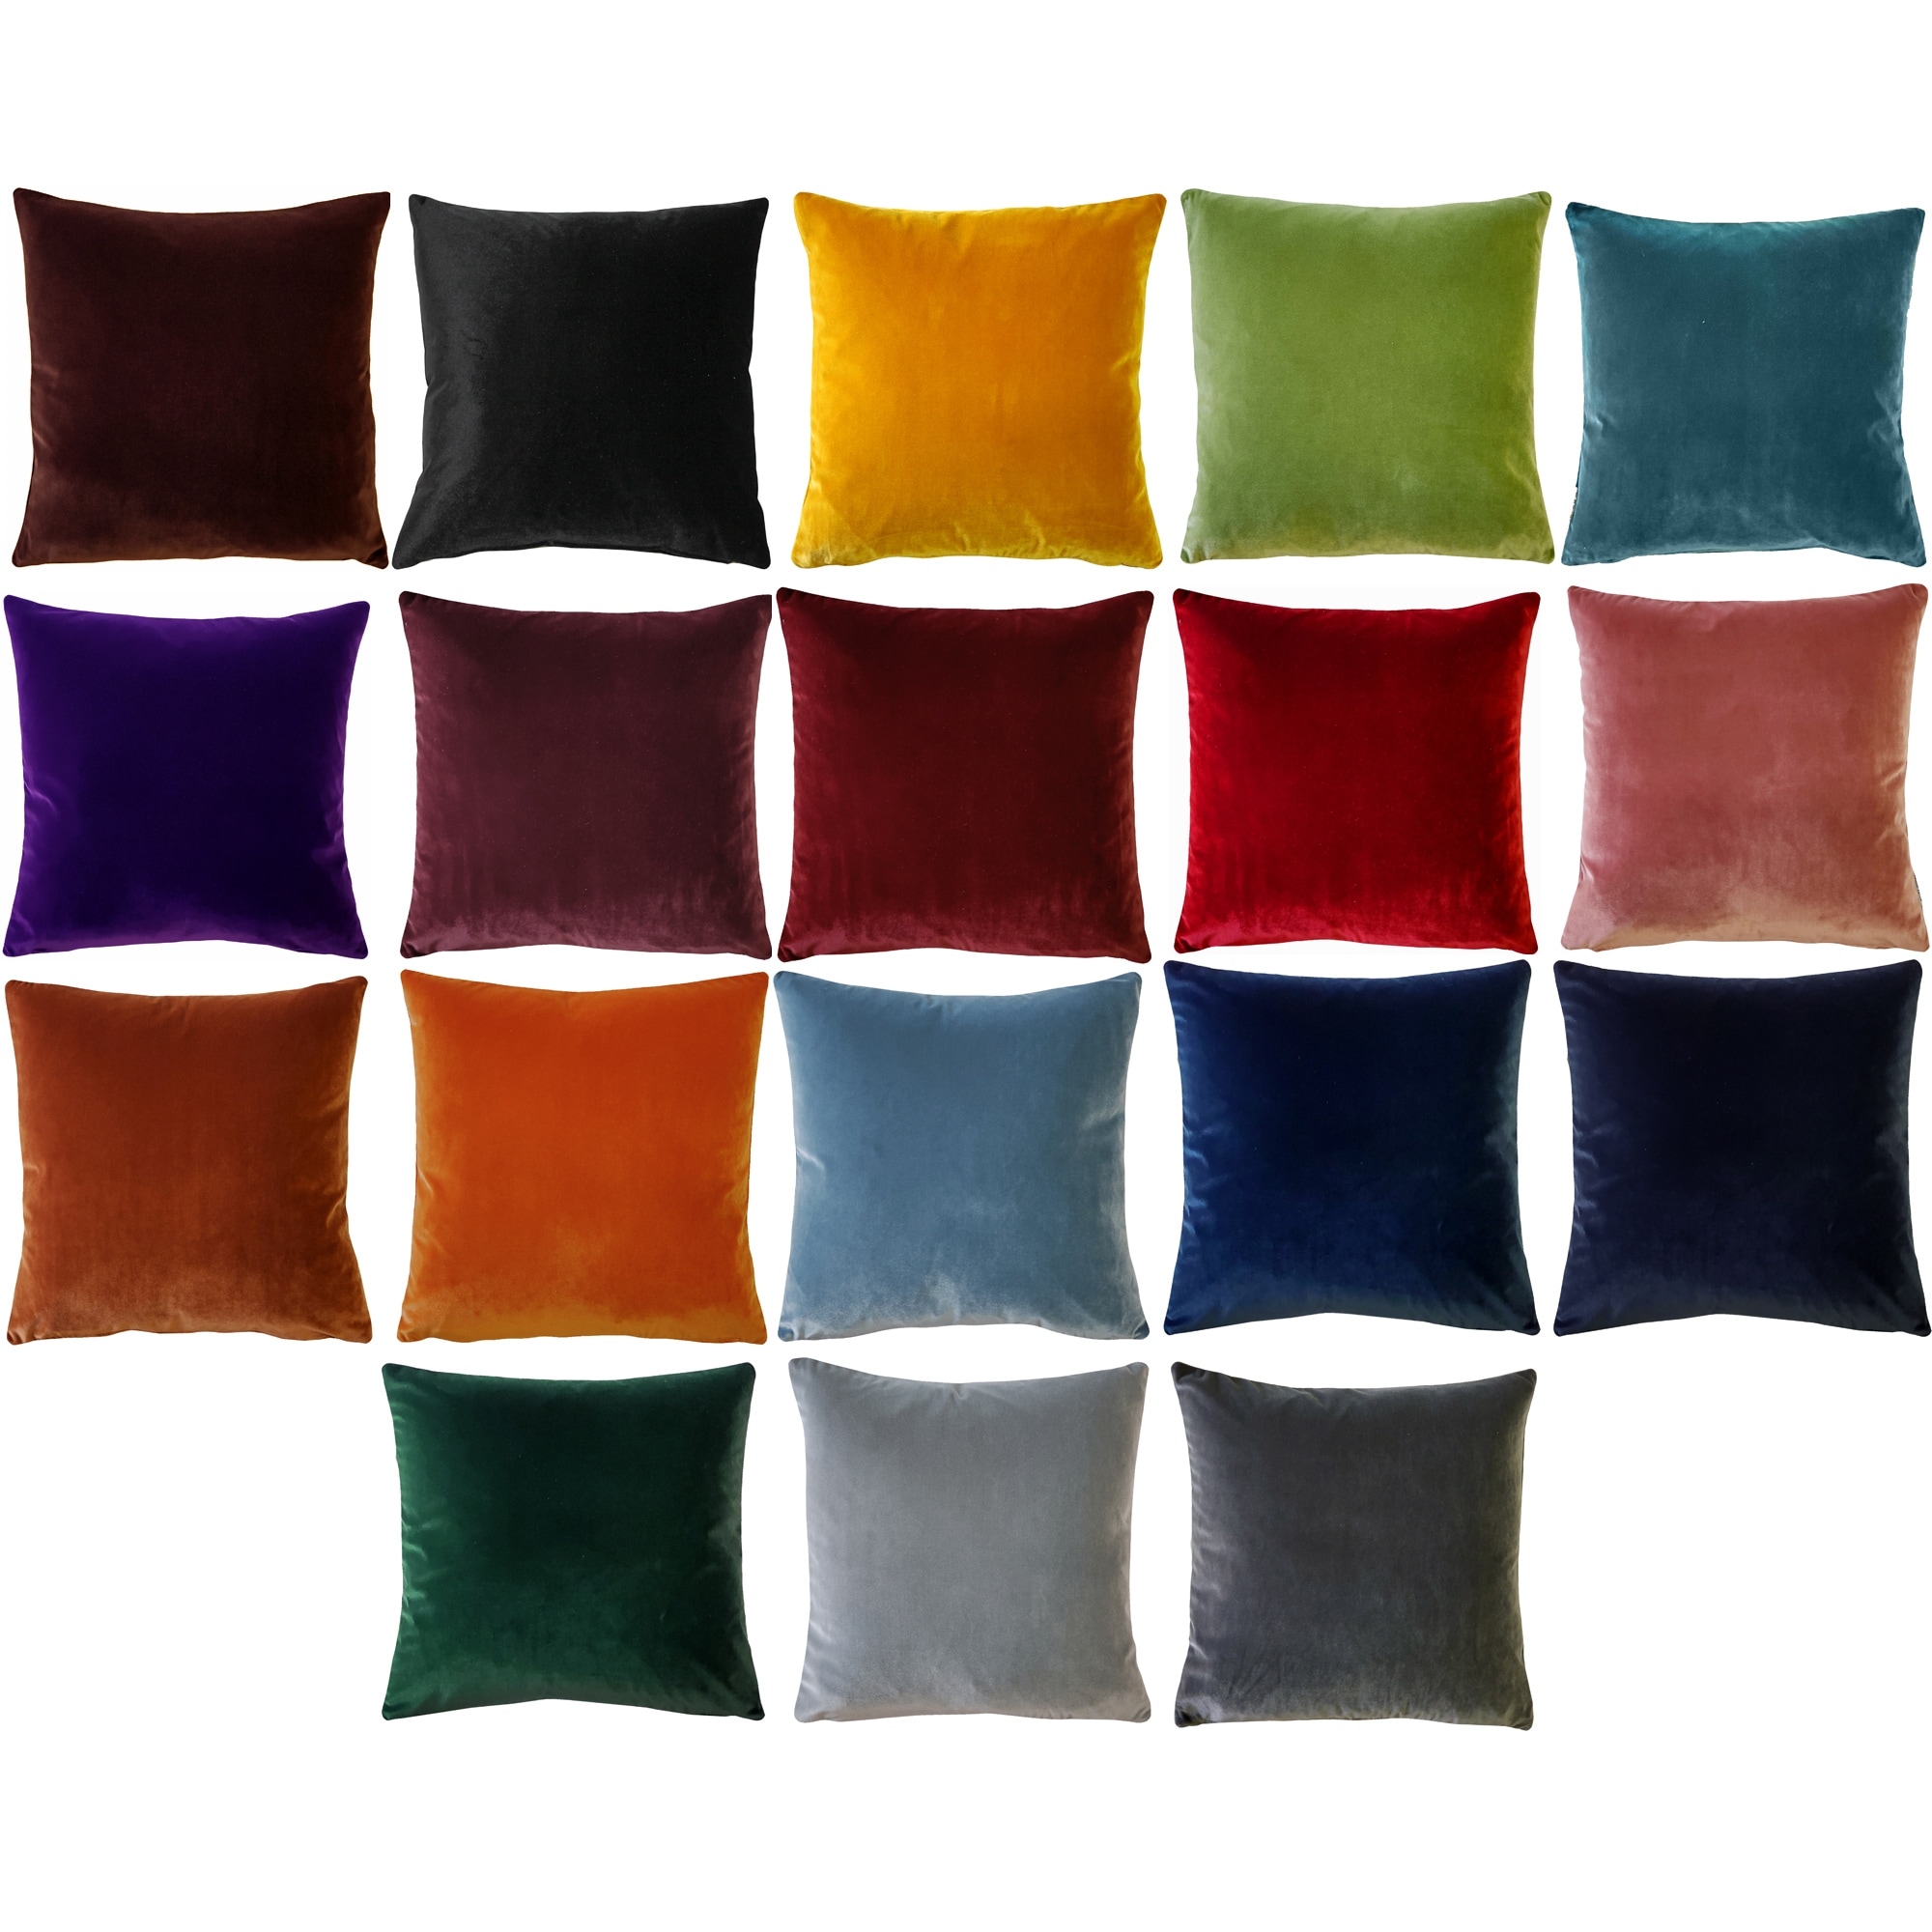 https://ak1.ostkcdn.com/images/products/is/images/direct/6d580b433ef096c1375eb6cfd649d5a09d86c42f/Pillow-Decor-Castello-Soft-Velvet-Throw-Pillows-%283-Sizes%2C-18-Colors%29.jpg